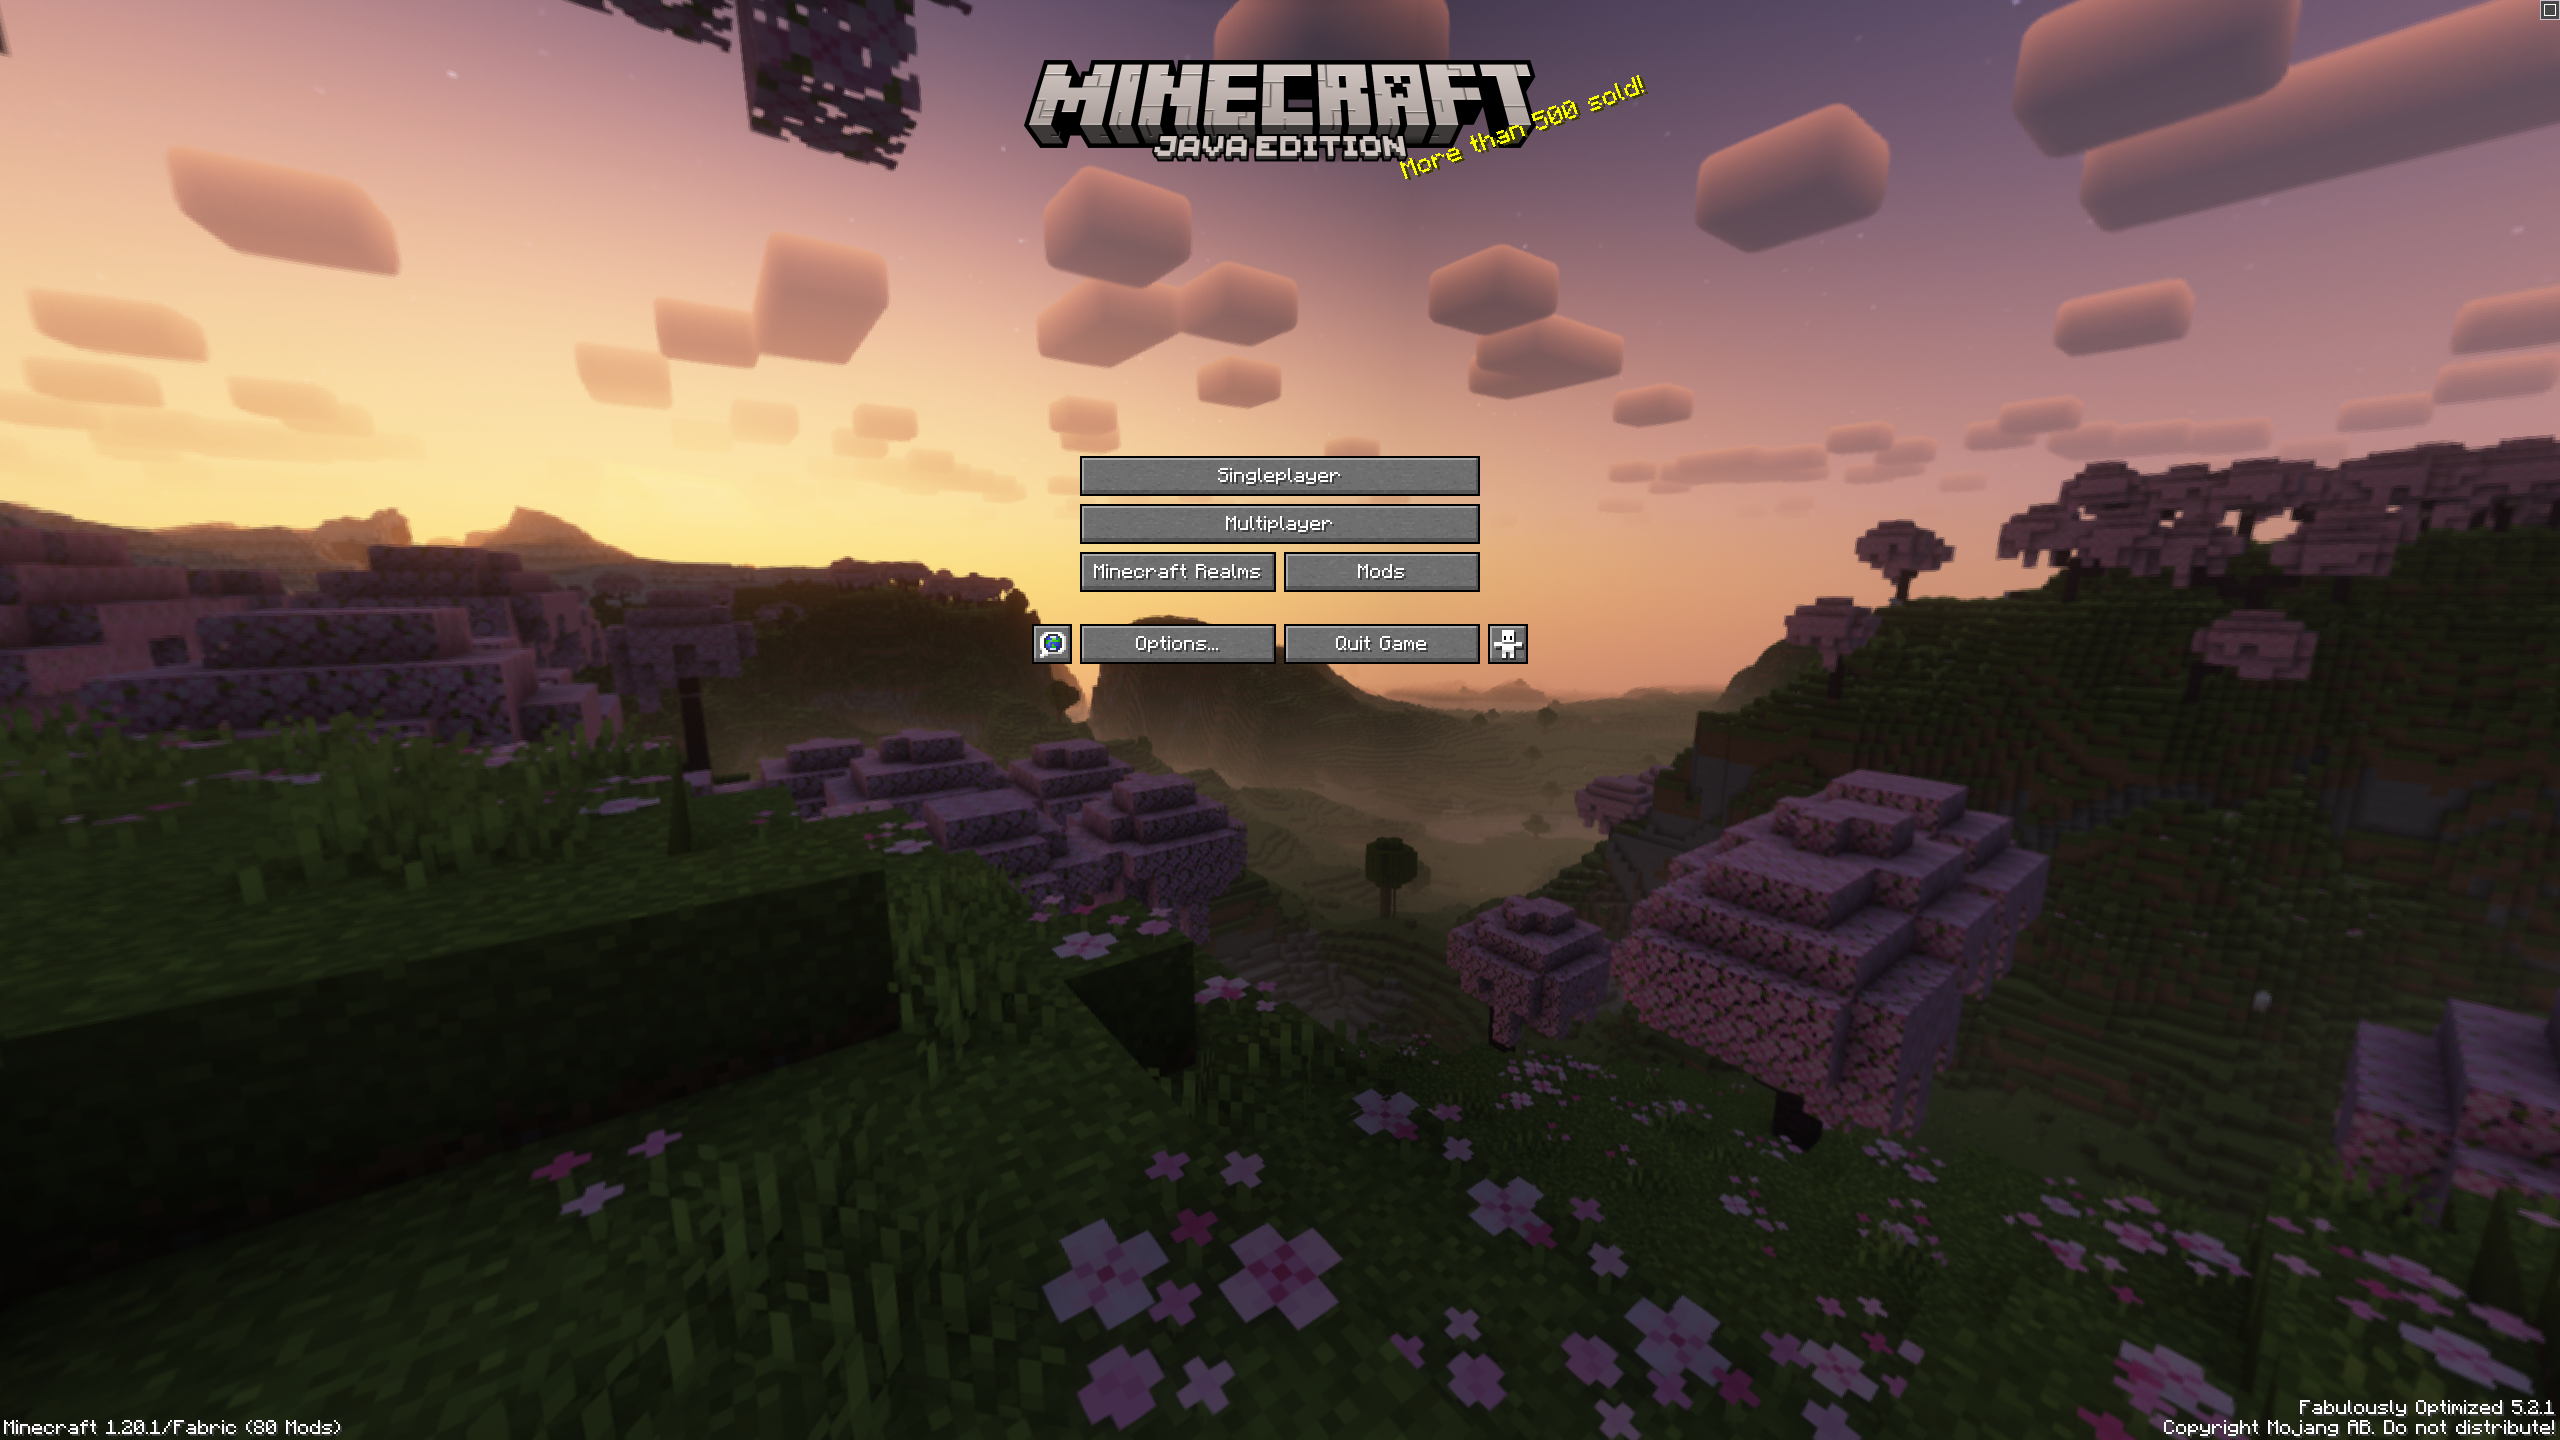 This is what it looks like inside the main menu with the resource pack installed.